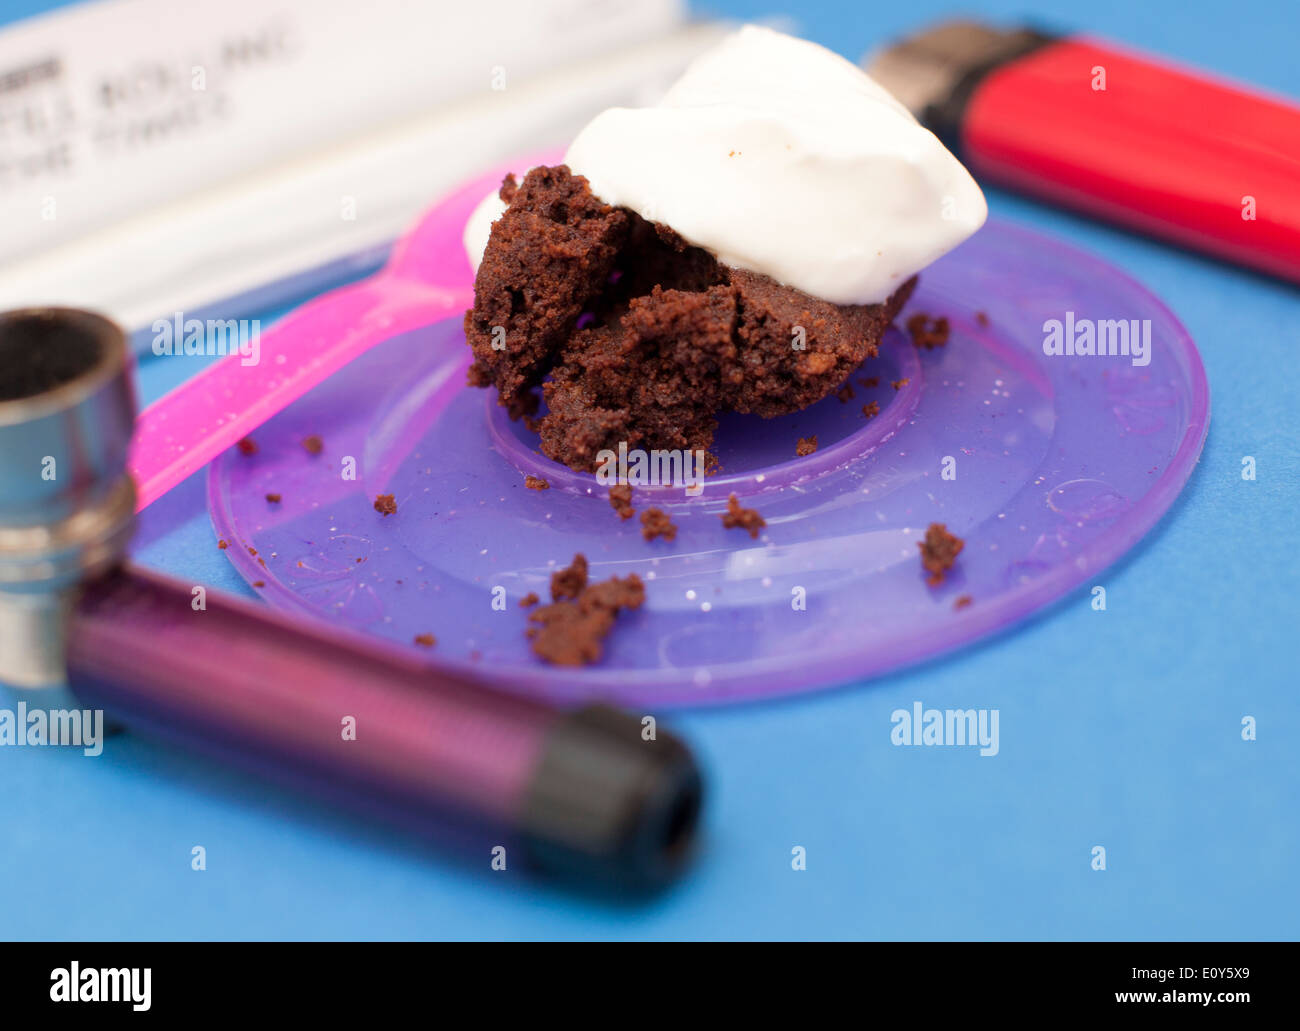 Hash Brownie or Space Cake topped with creme fraiche framed by smoking paraphernalia, London Stock Photo